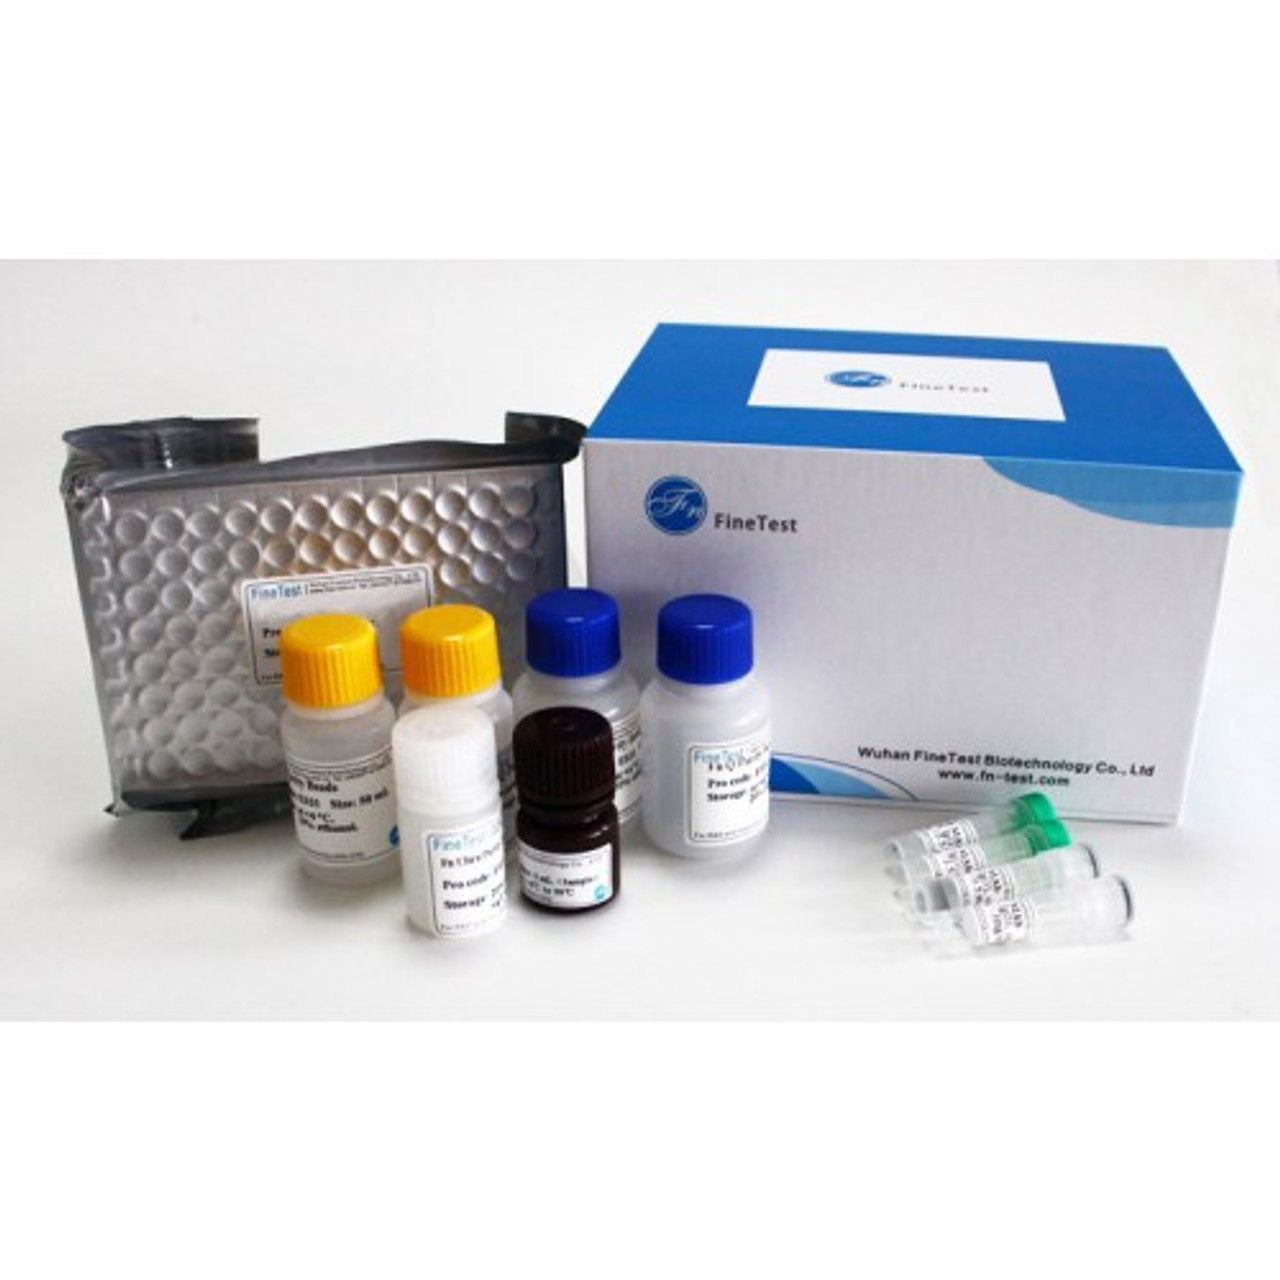 Rat PACAP-27(Pituitary Adenylate Cyclase Activating Polypeptide 27) ELISA Kit